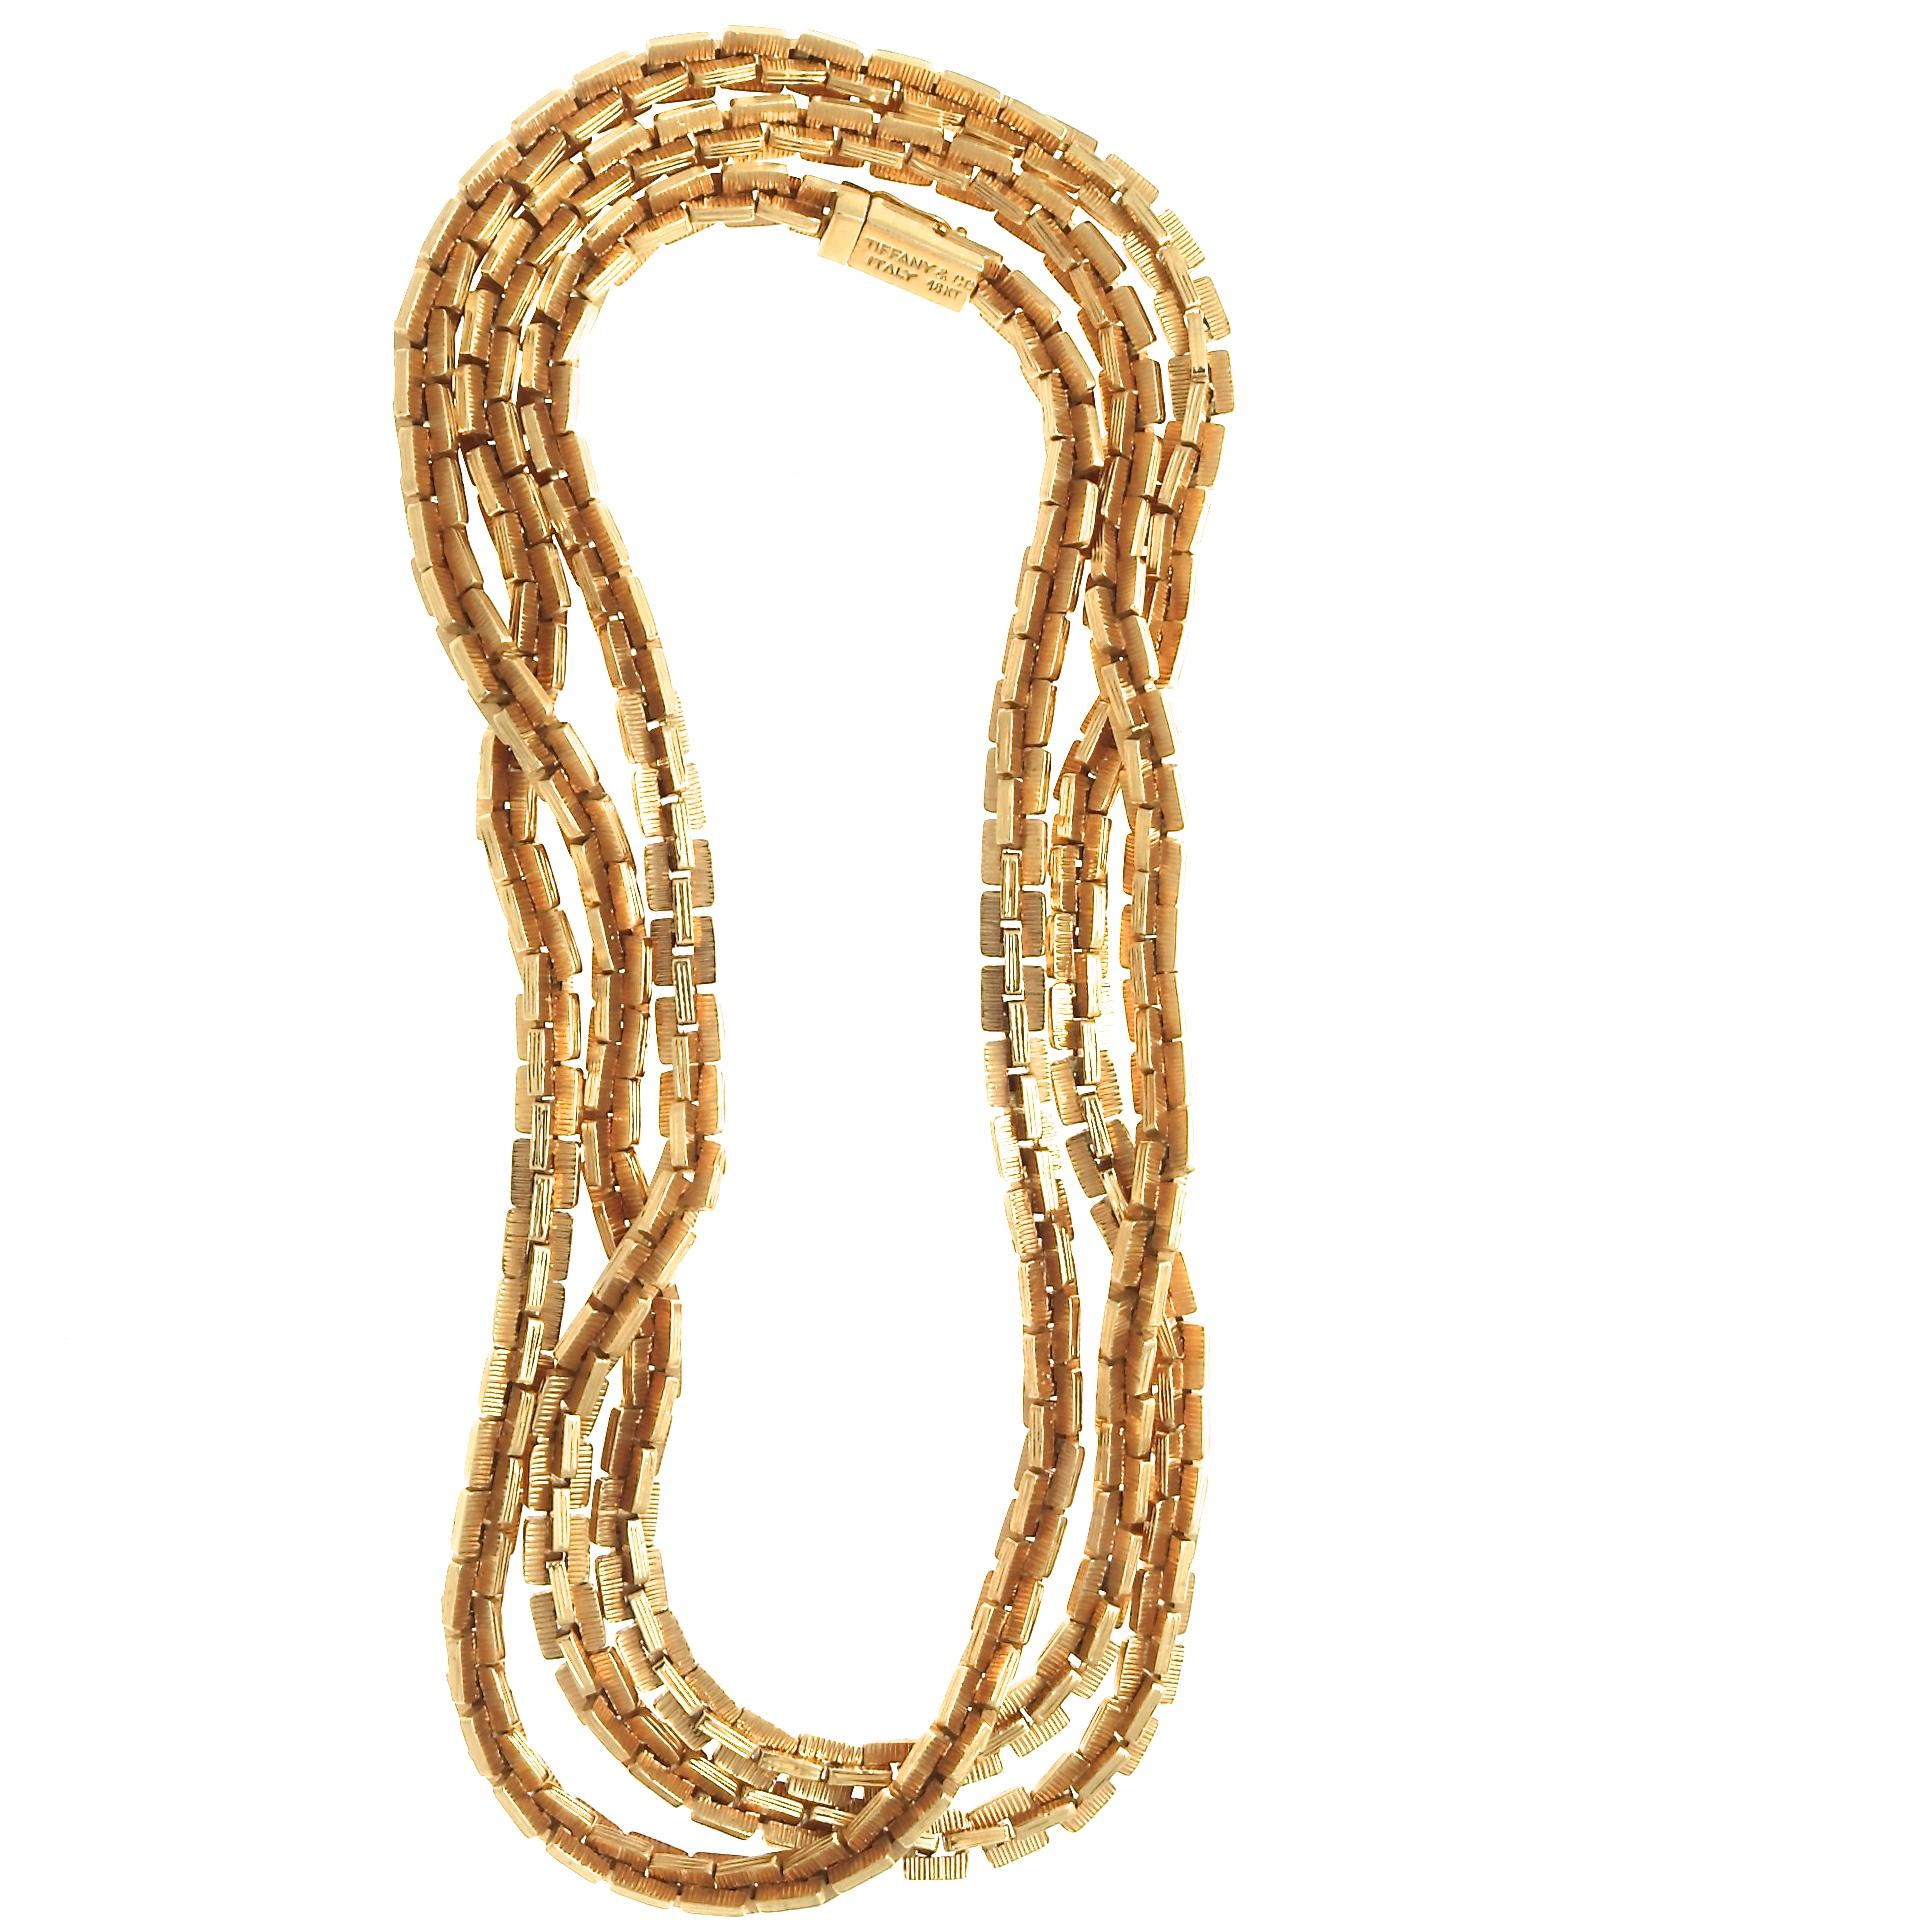 A chain is never just a chain, especially when it's made by Tiffany & Co. With its own unique design of interlocking components, this substantial 18 karat gold neck piece is 37 inches long and makes a major statement in lustrous gold. No layering